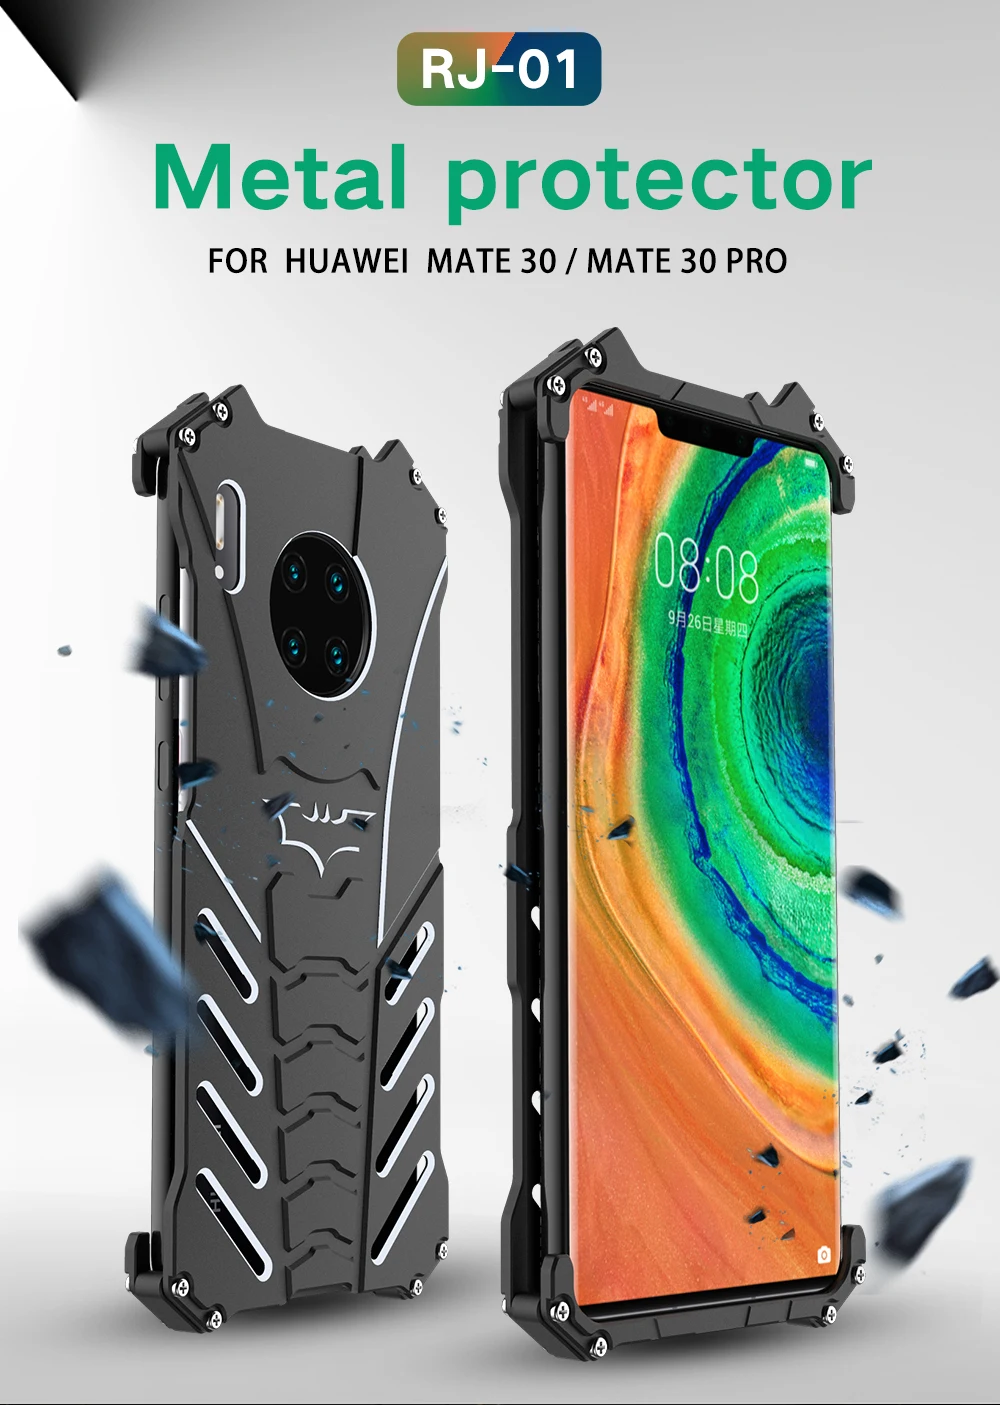 

R-JUST Metal Case For Huawei Mate 30 Aluminum Metal Bumper Frame Armor Protective Shockproof Phone Cover For Huawei Mate 30 Pro